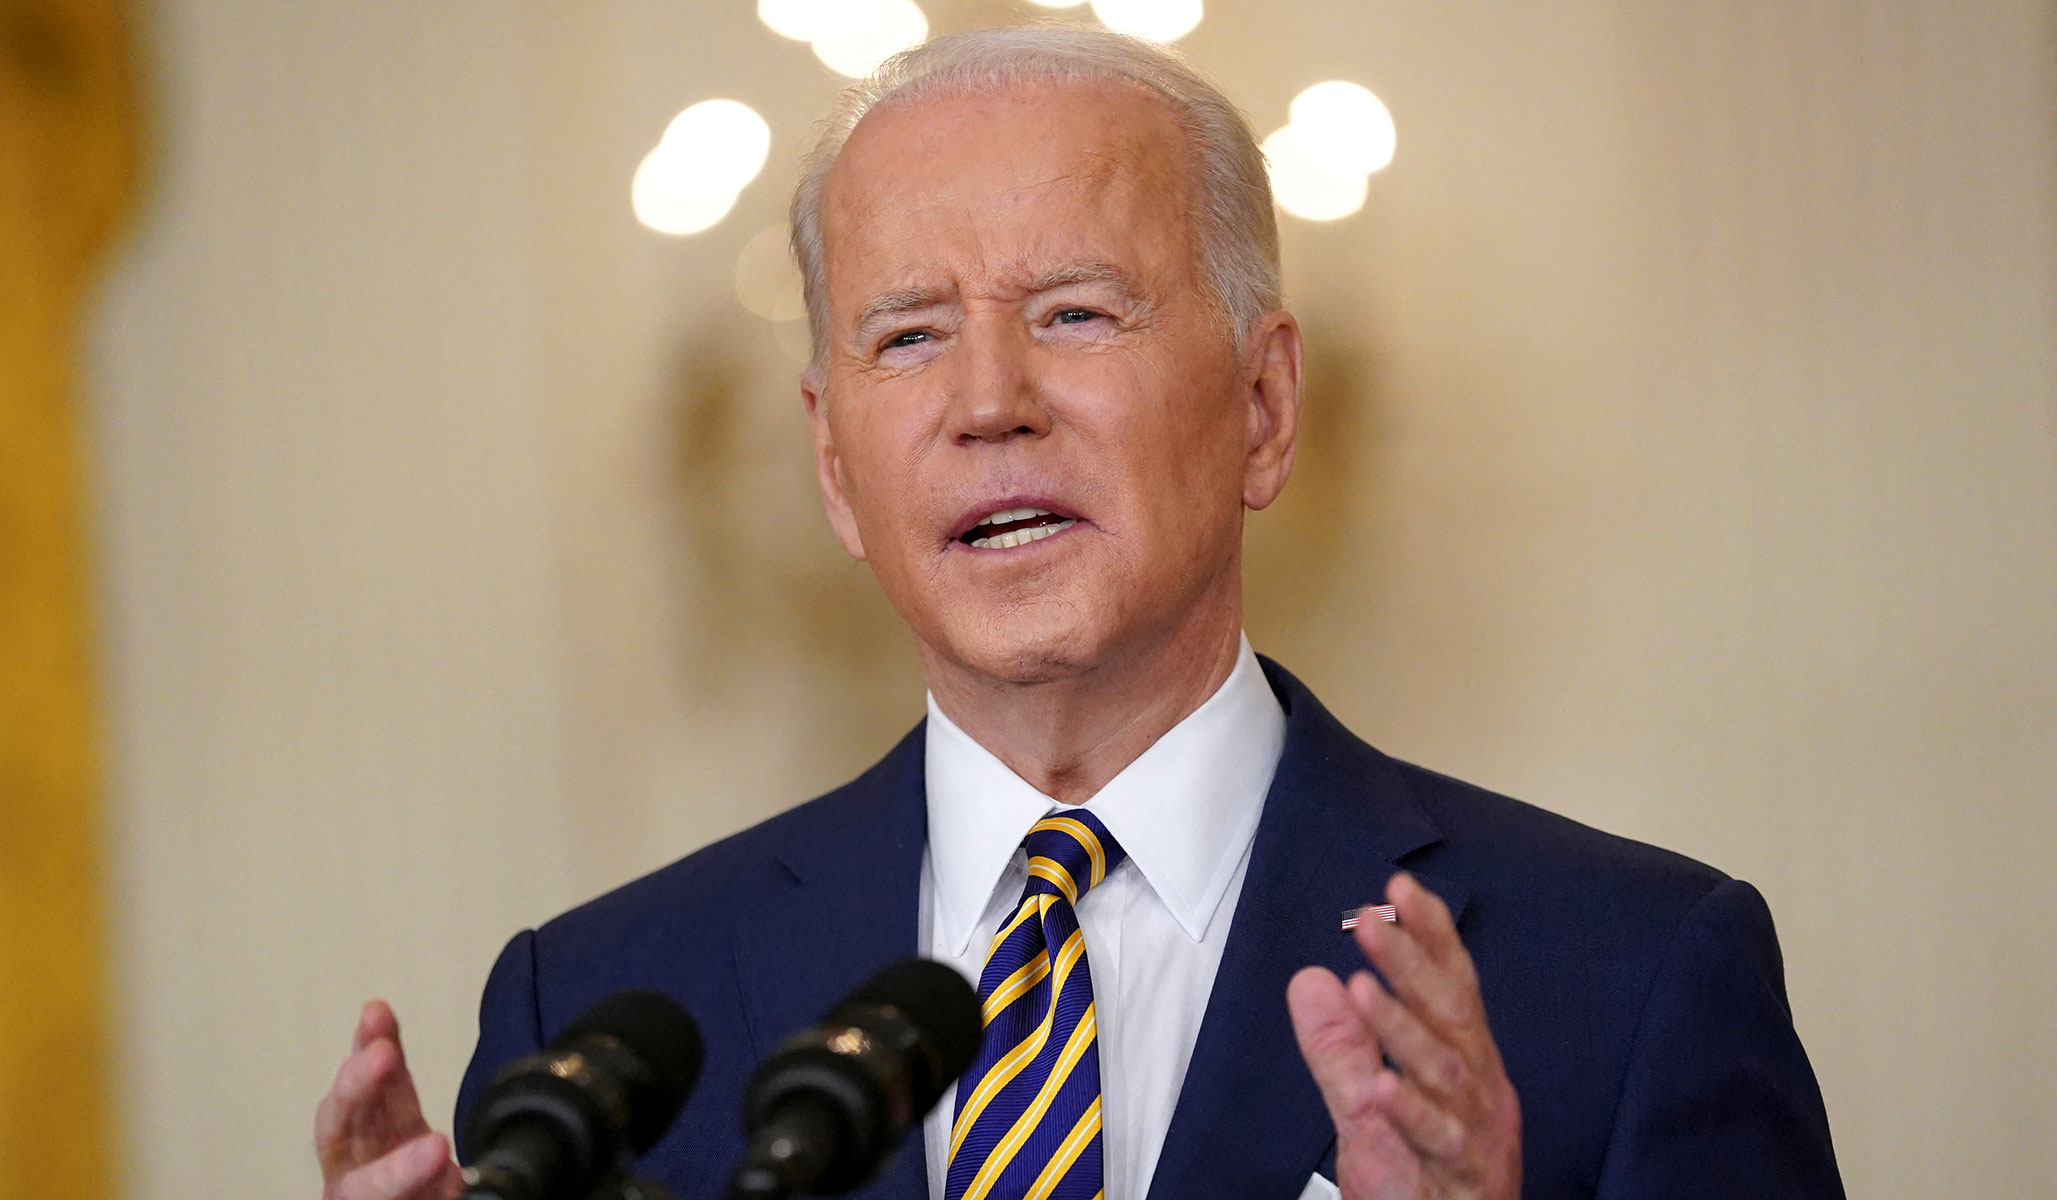 Biden Concedes Dems Must Break Up Build Back Better into ‘Chunks’ to Rescue Stalled Agenda | National Review